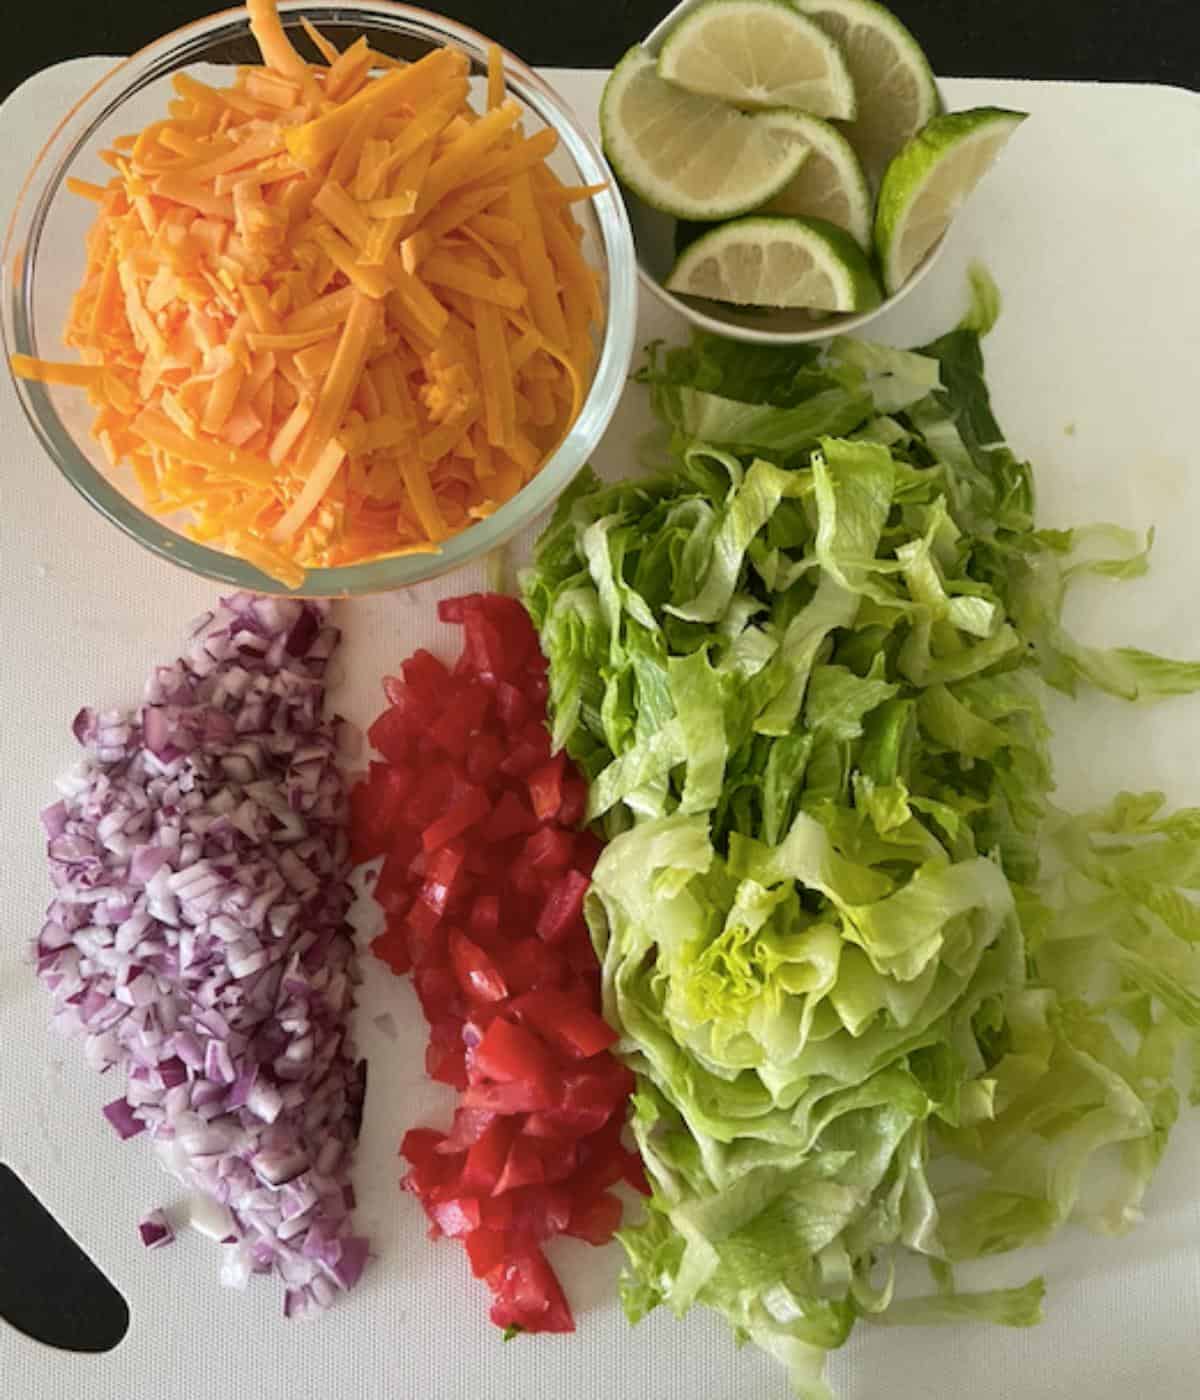 taco toppings on cutting board (lettuce, cheese, onion, tomato and limes)